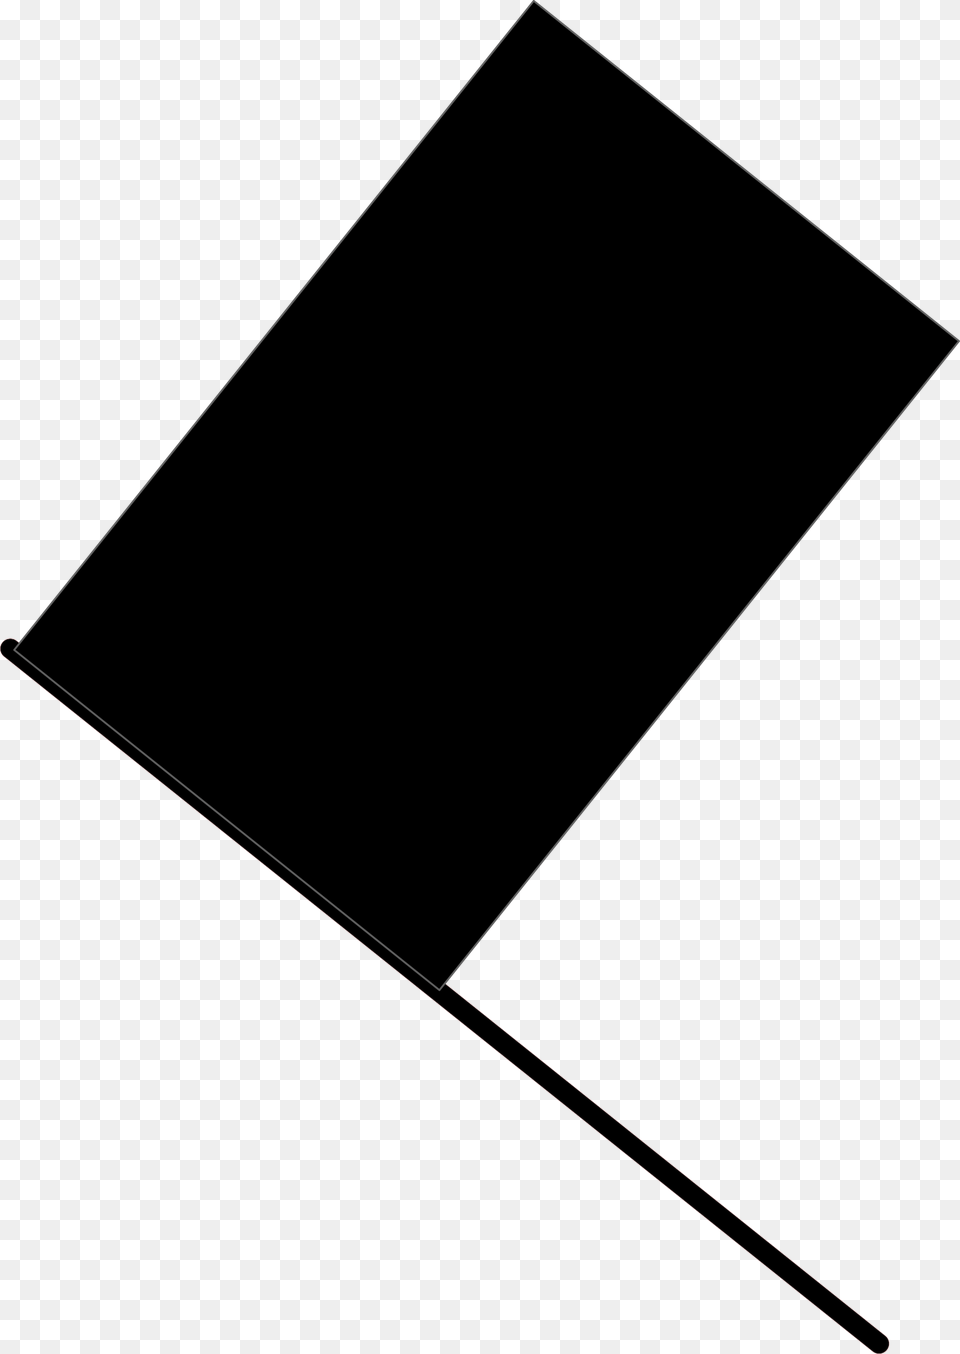 Black Flag Clip Arts Black Flag Clipart, Lighting, Bow, Weapon, Triangle Png Image